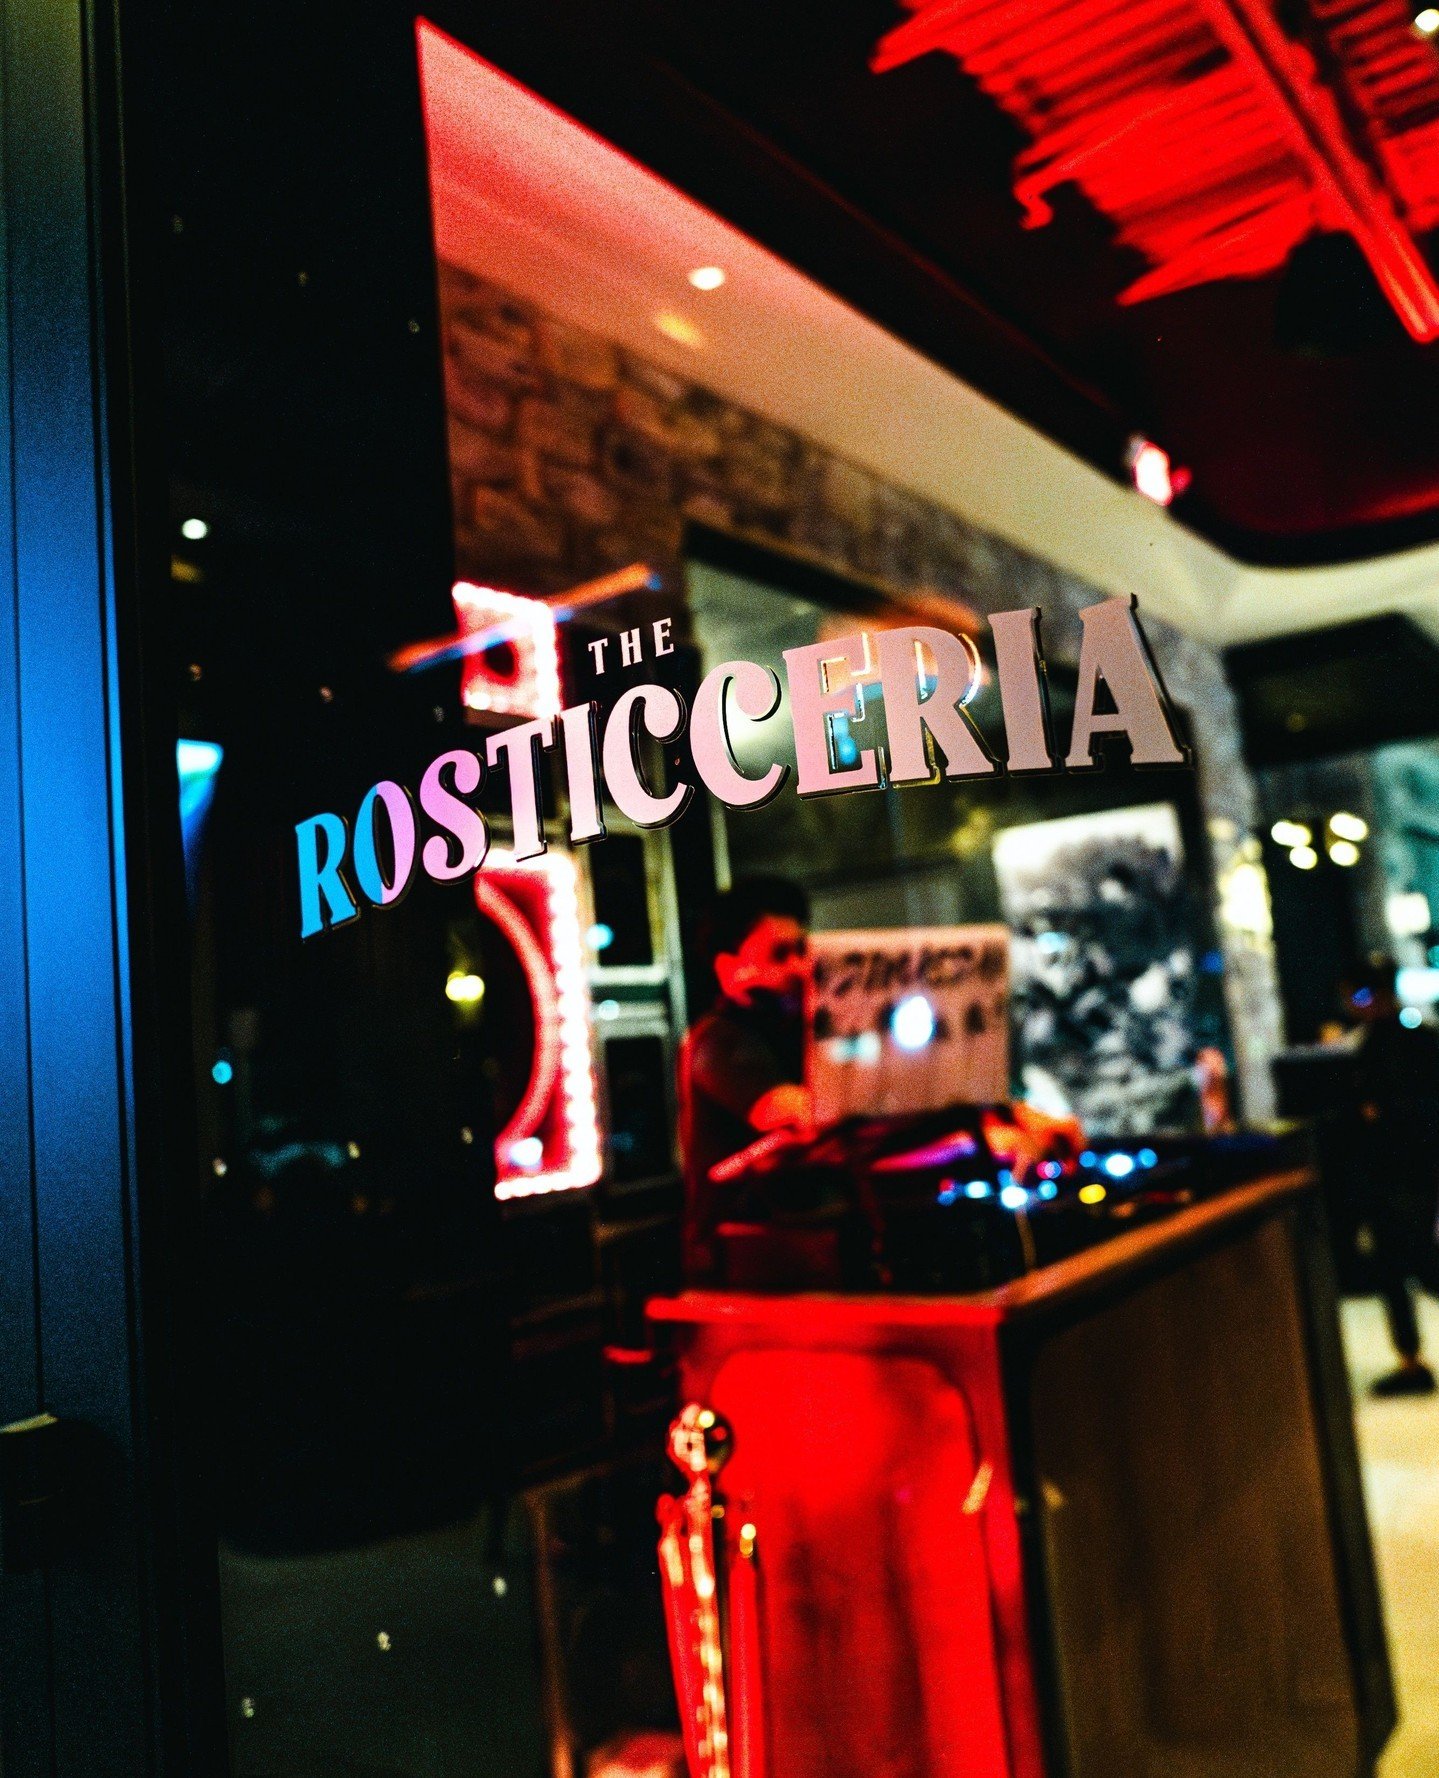 Here at Rosticceria, we like to play good music, have immaculate vibes, cool lighting and an unforgettable time 😎⁠
⁠
Come in and hangout with us, and experience for yourself 🤩⁠
⁠
We're on OpenTable for reservations 🙌⁠
.⁠
.⁠
.⁠
#therosticceria #ros